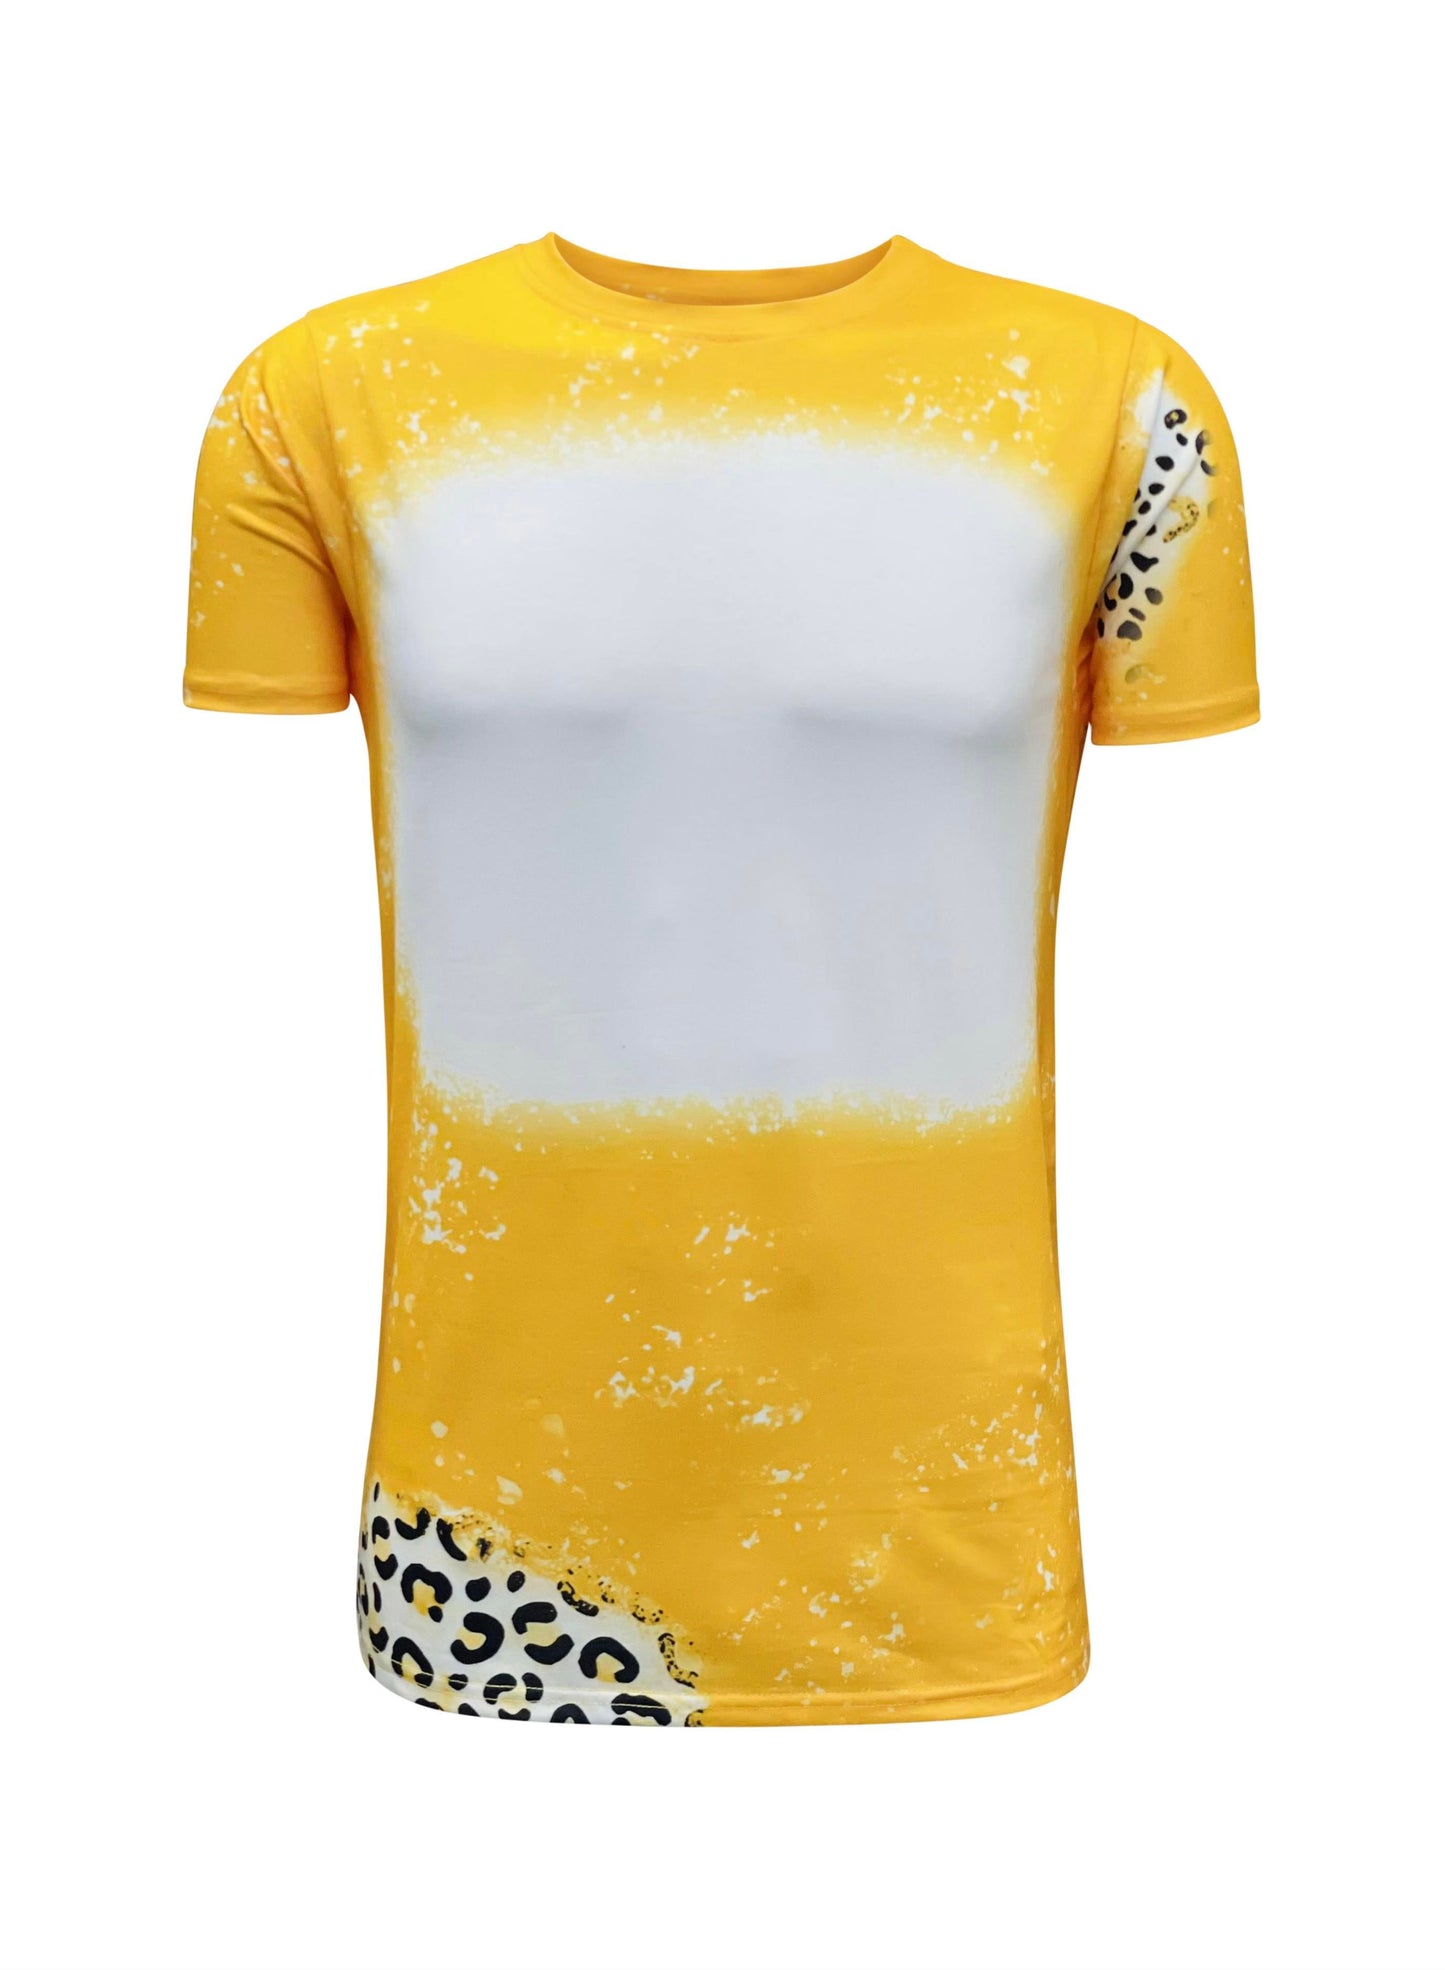 Cheetah Unisex Faux Bleached Shirts, ready for Sublimation or Screen Transfer